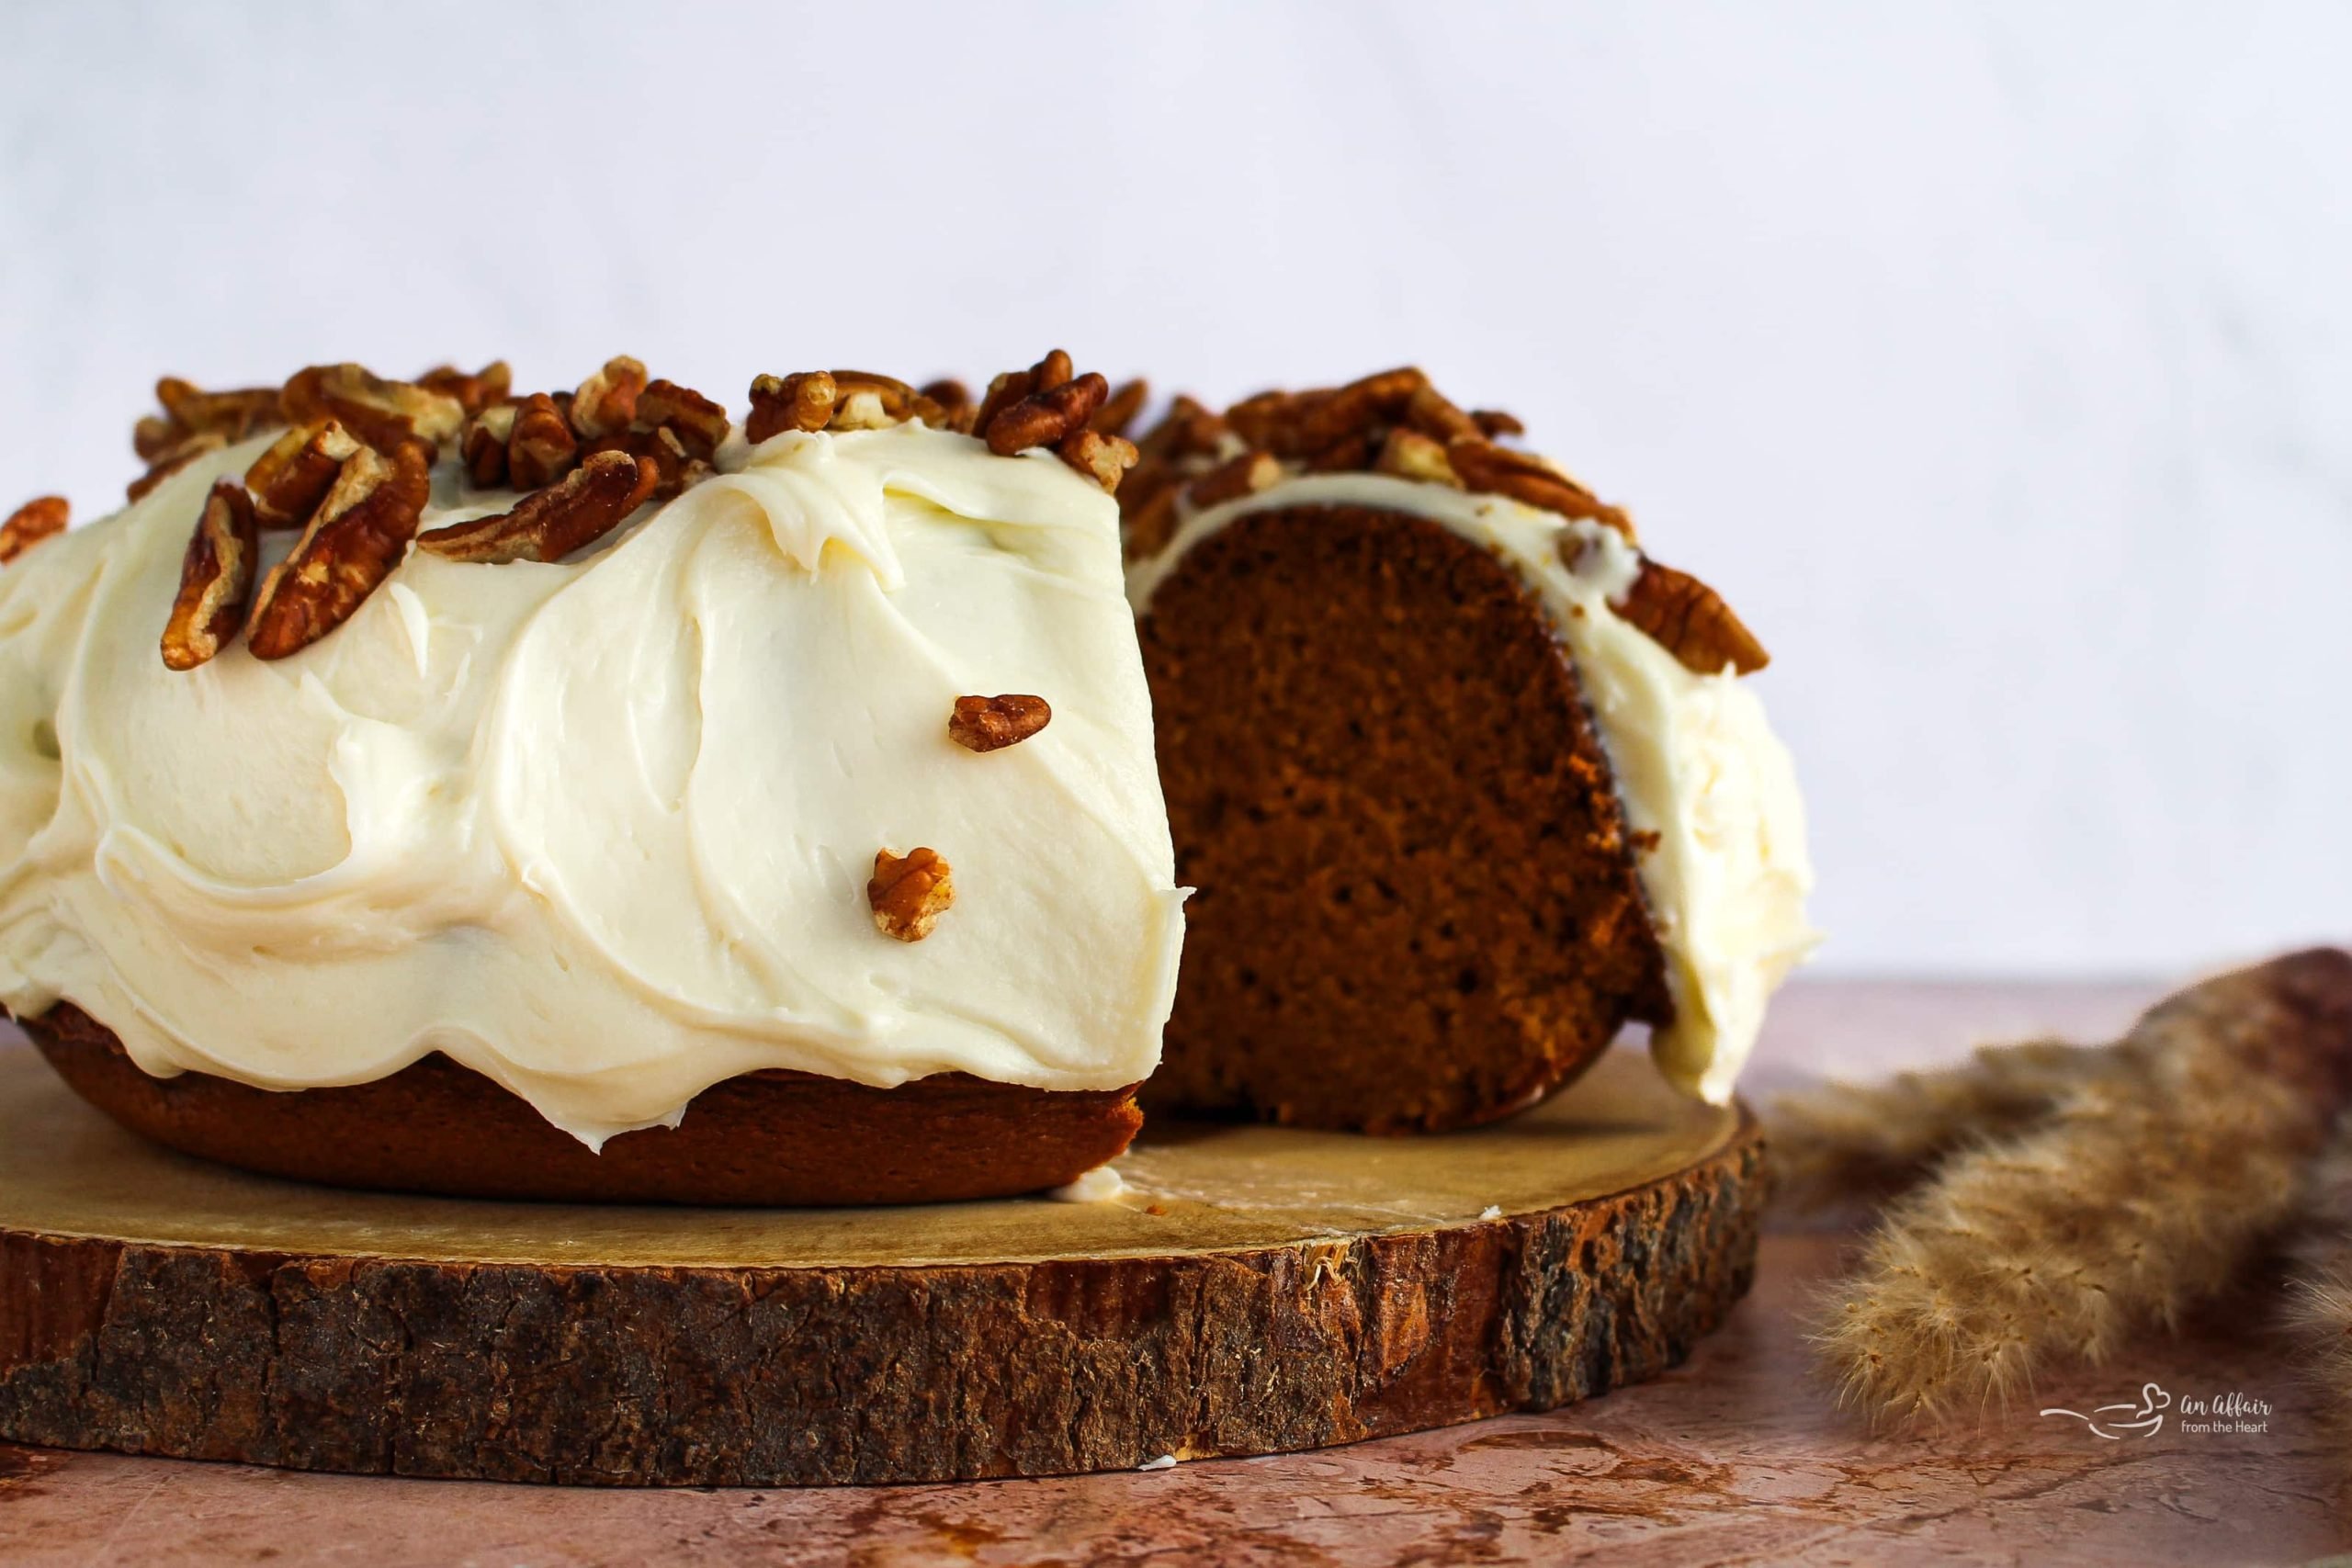 https://anaffairfromtheheart.com/wp-content/uploads/2015/11/Pumpkin-Bundt-Cake-with-Cream-Cheese-Frosting-Cinderella-Cake-scaled.jpg